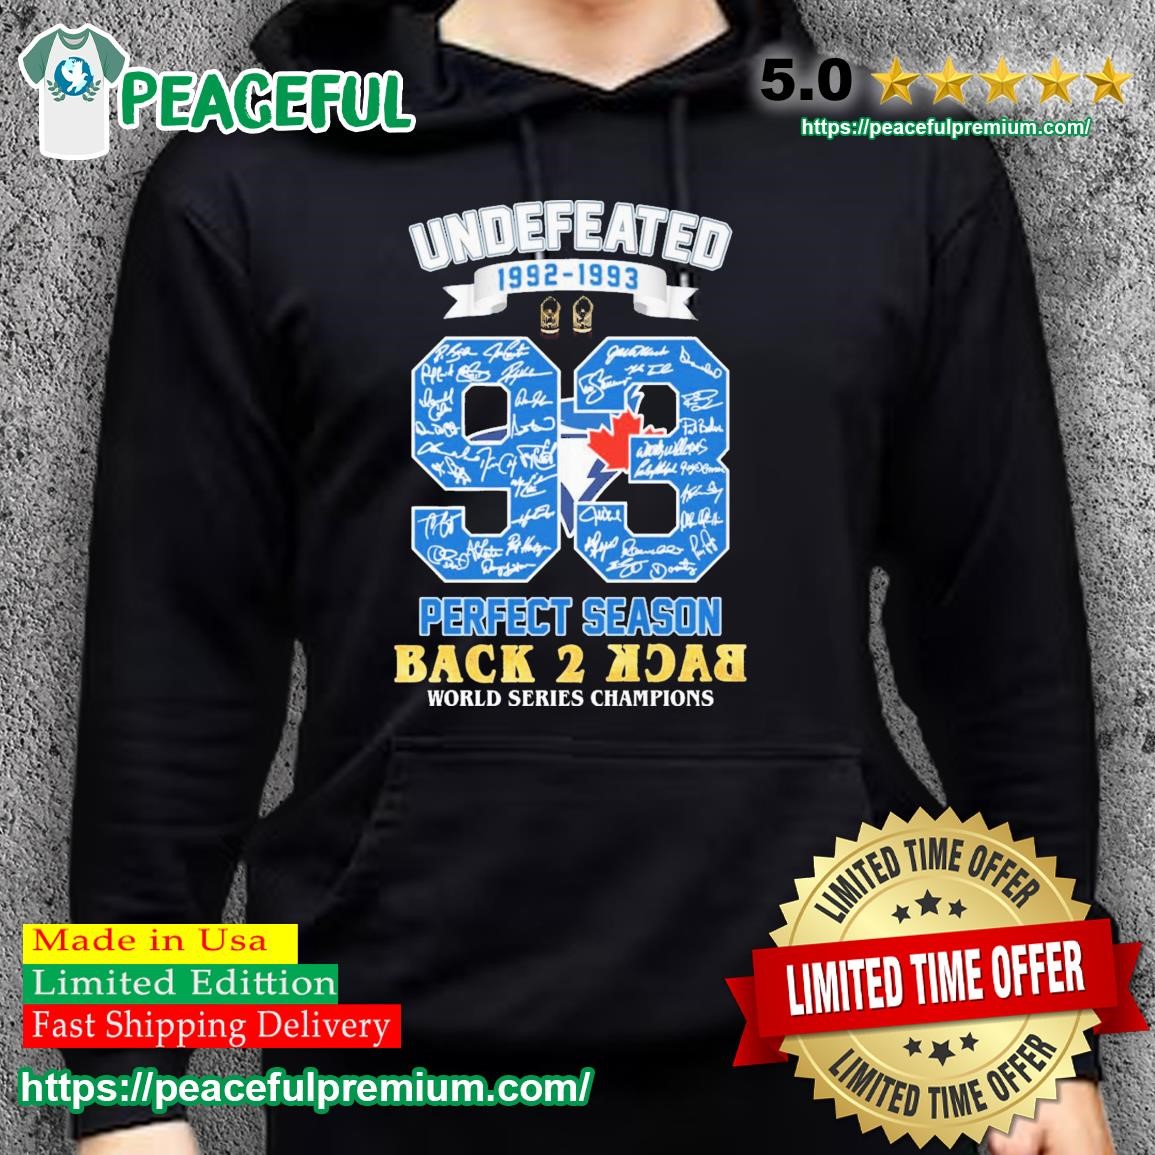 Official Undefeated 1992 - 01993 Perfect Season Back 2 Back World Series  Champions Shirt, hoodie, sweater, long sleeve and tank top